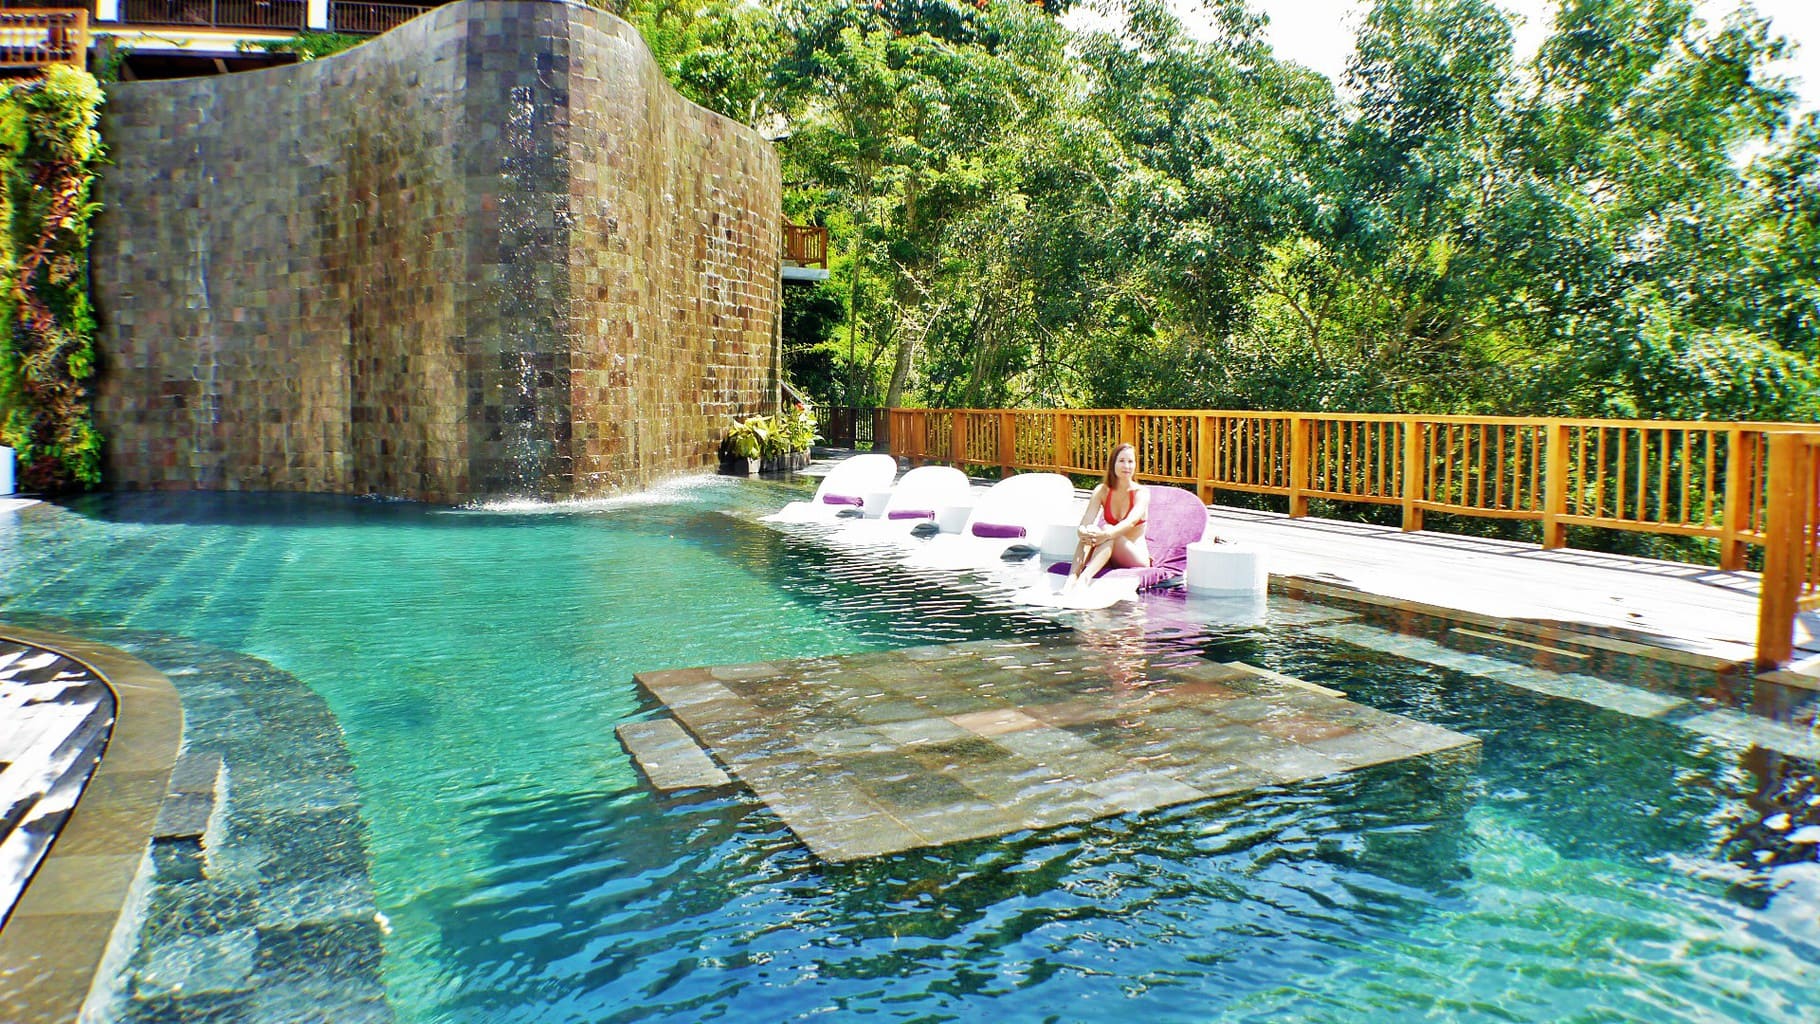 The Pool at the Hanging Gardens